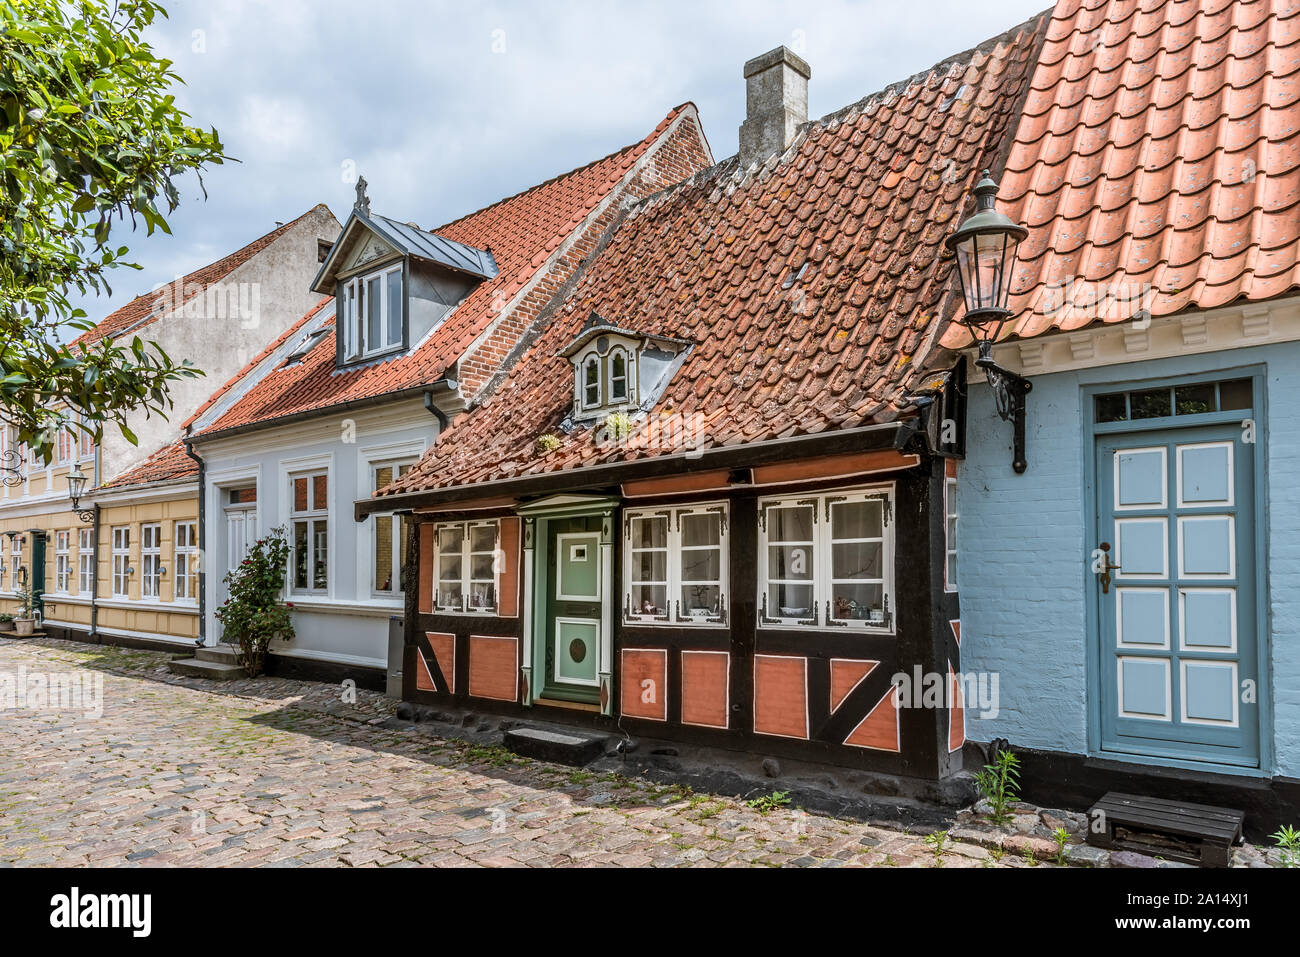 An old romantic fairytale halftimbered house on a cobblestone street in the island of Aero, Denmark, July 13, 2019 Stock Photo